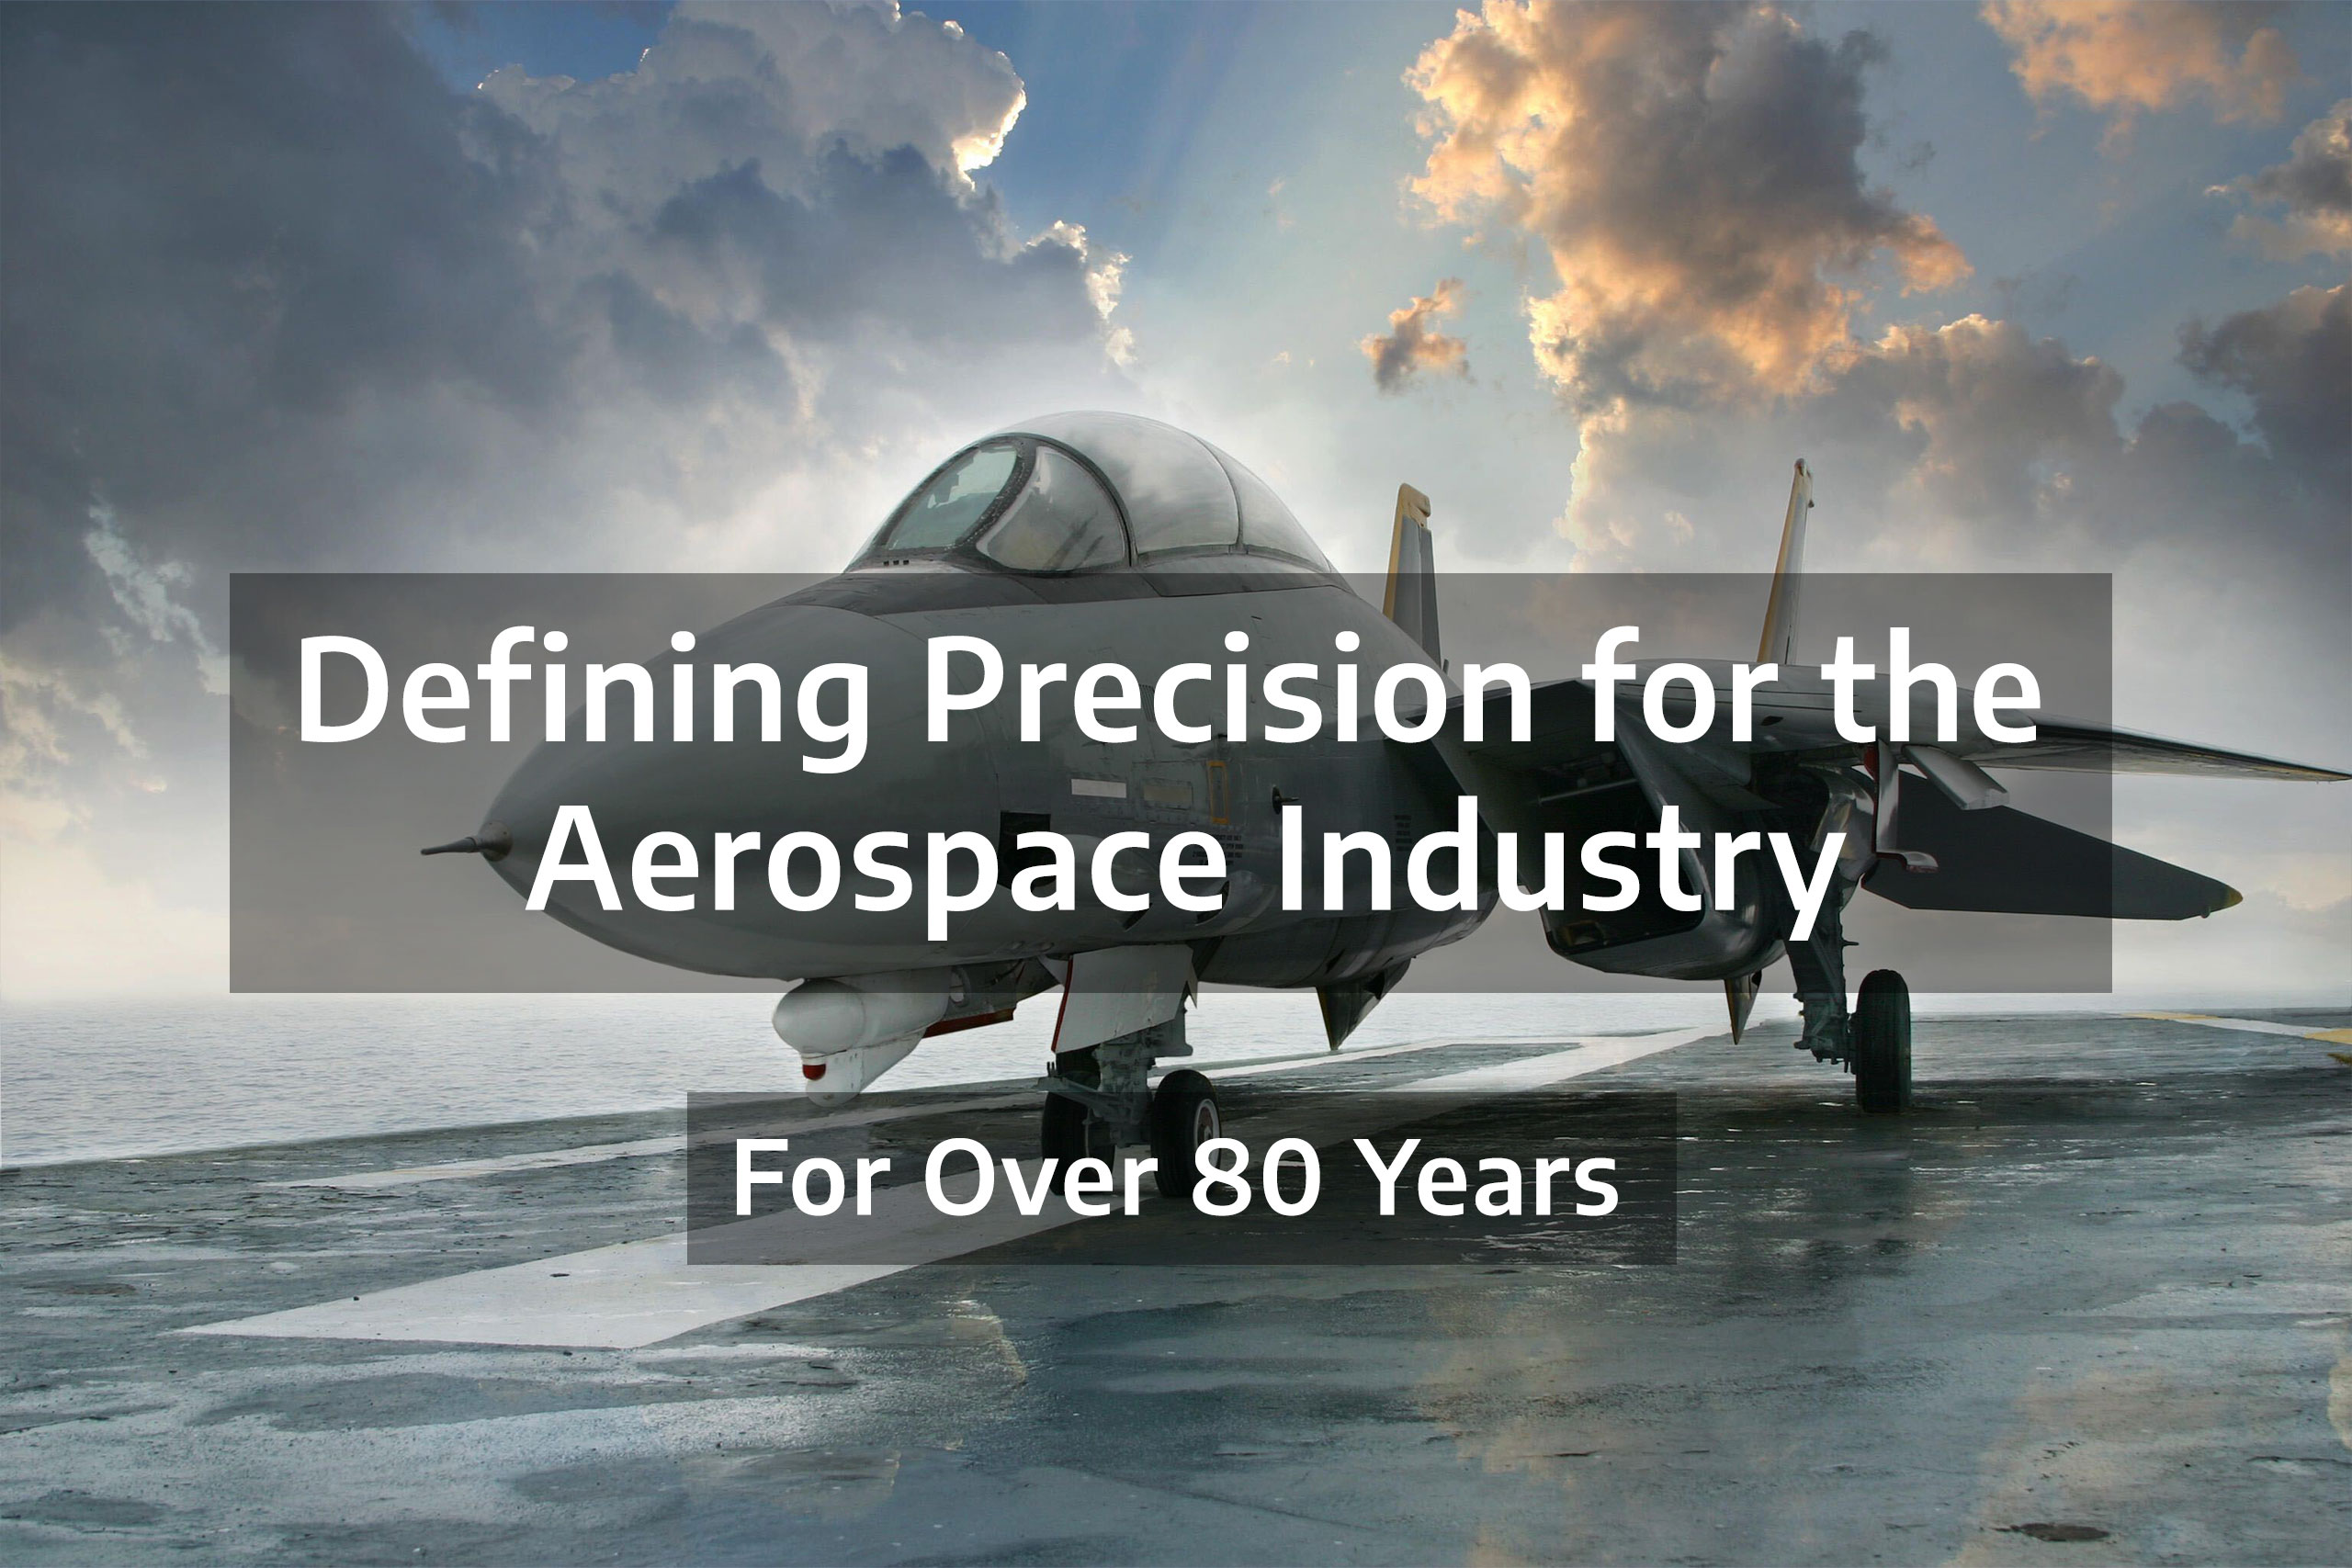 photo of a Few-15 with the text "Defining Precision for the Aerospace Industry of Over 80 Years" superimposed